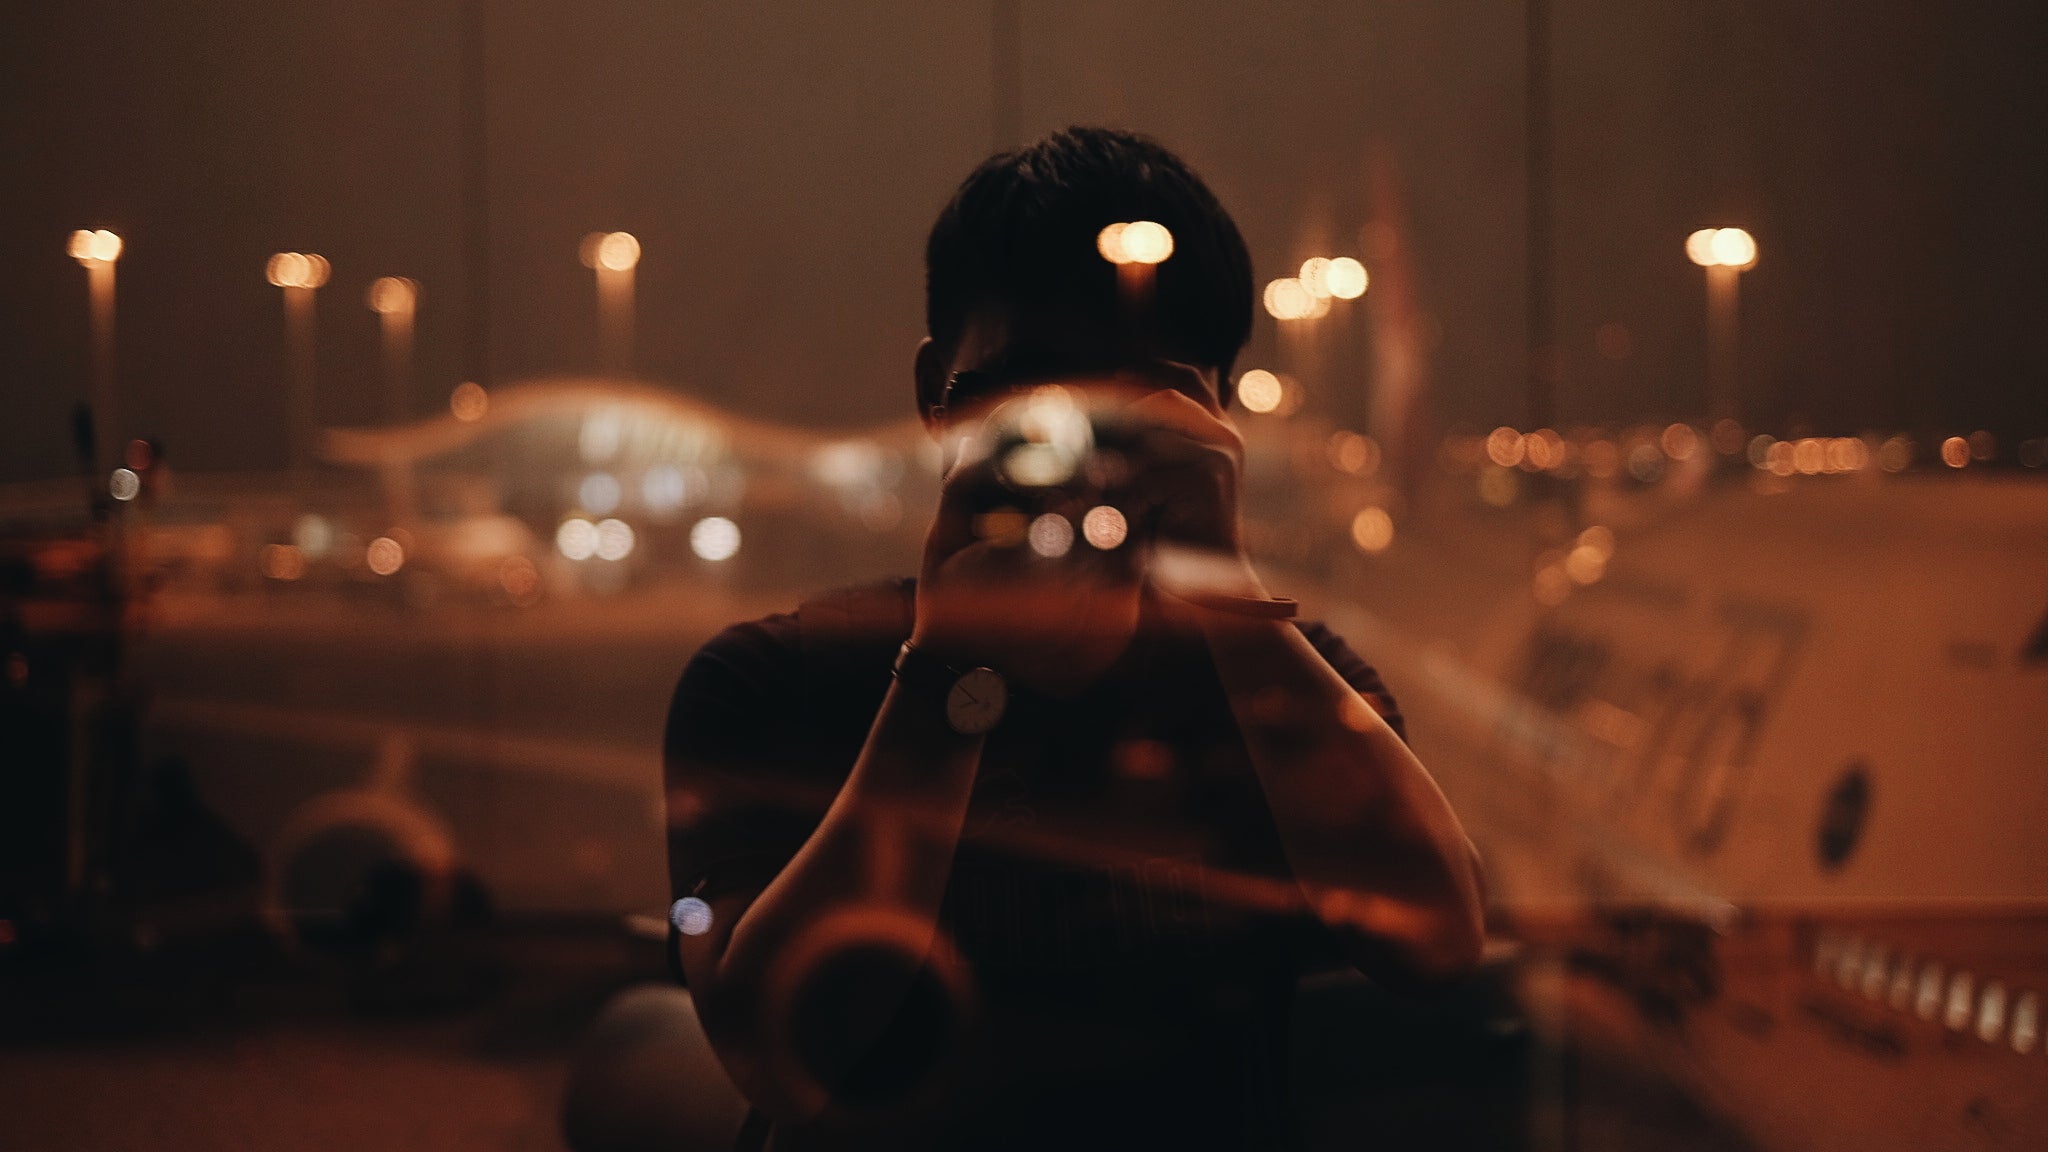 Man Photographing Through Camera Reflecting On Window At Night